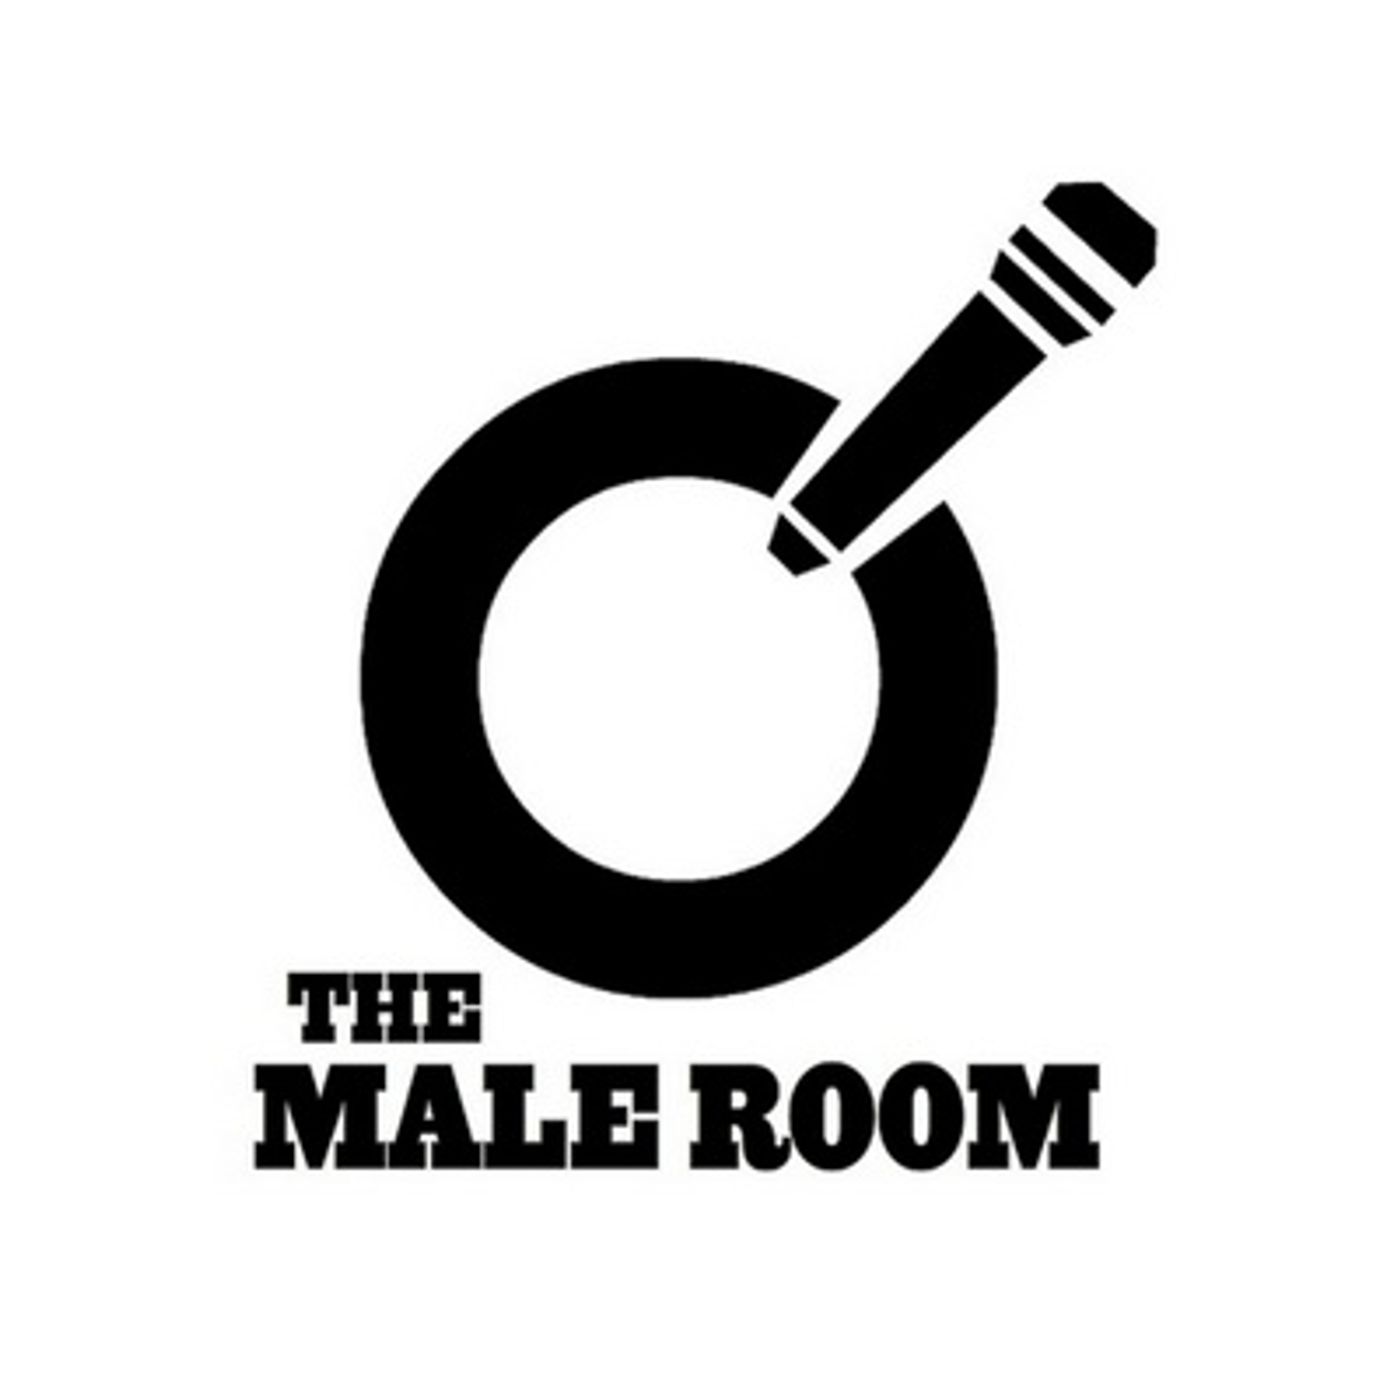 Rescued from drowning - an extraordinary story - The Male Room Episode 8